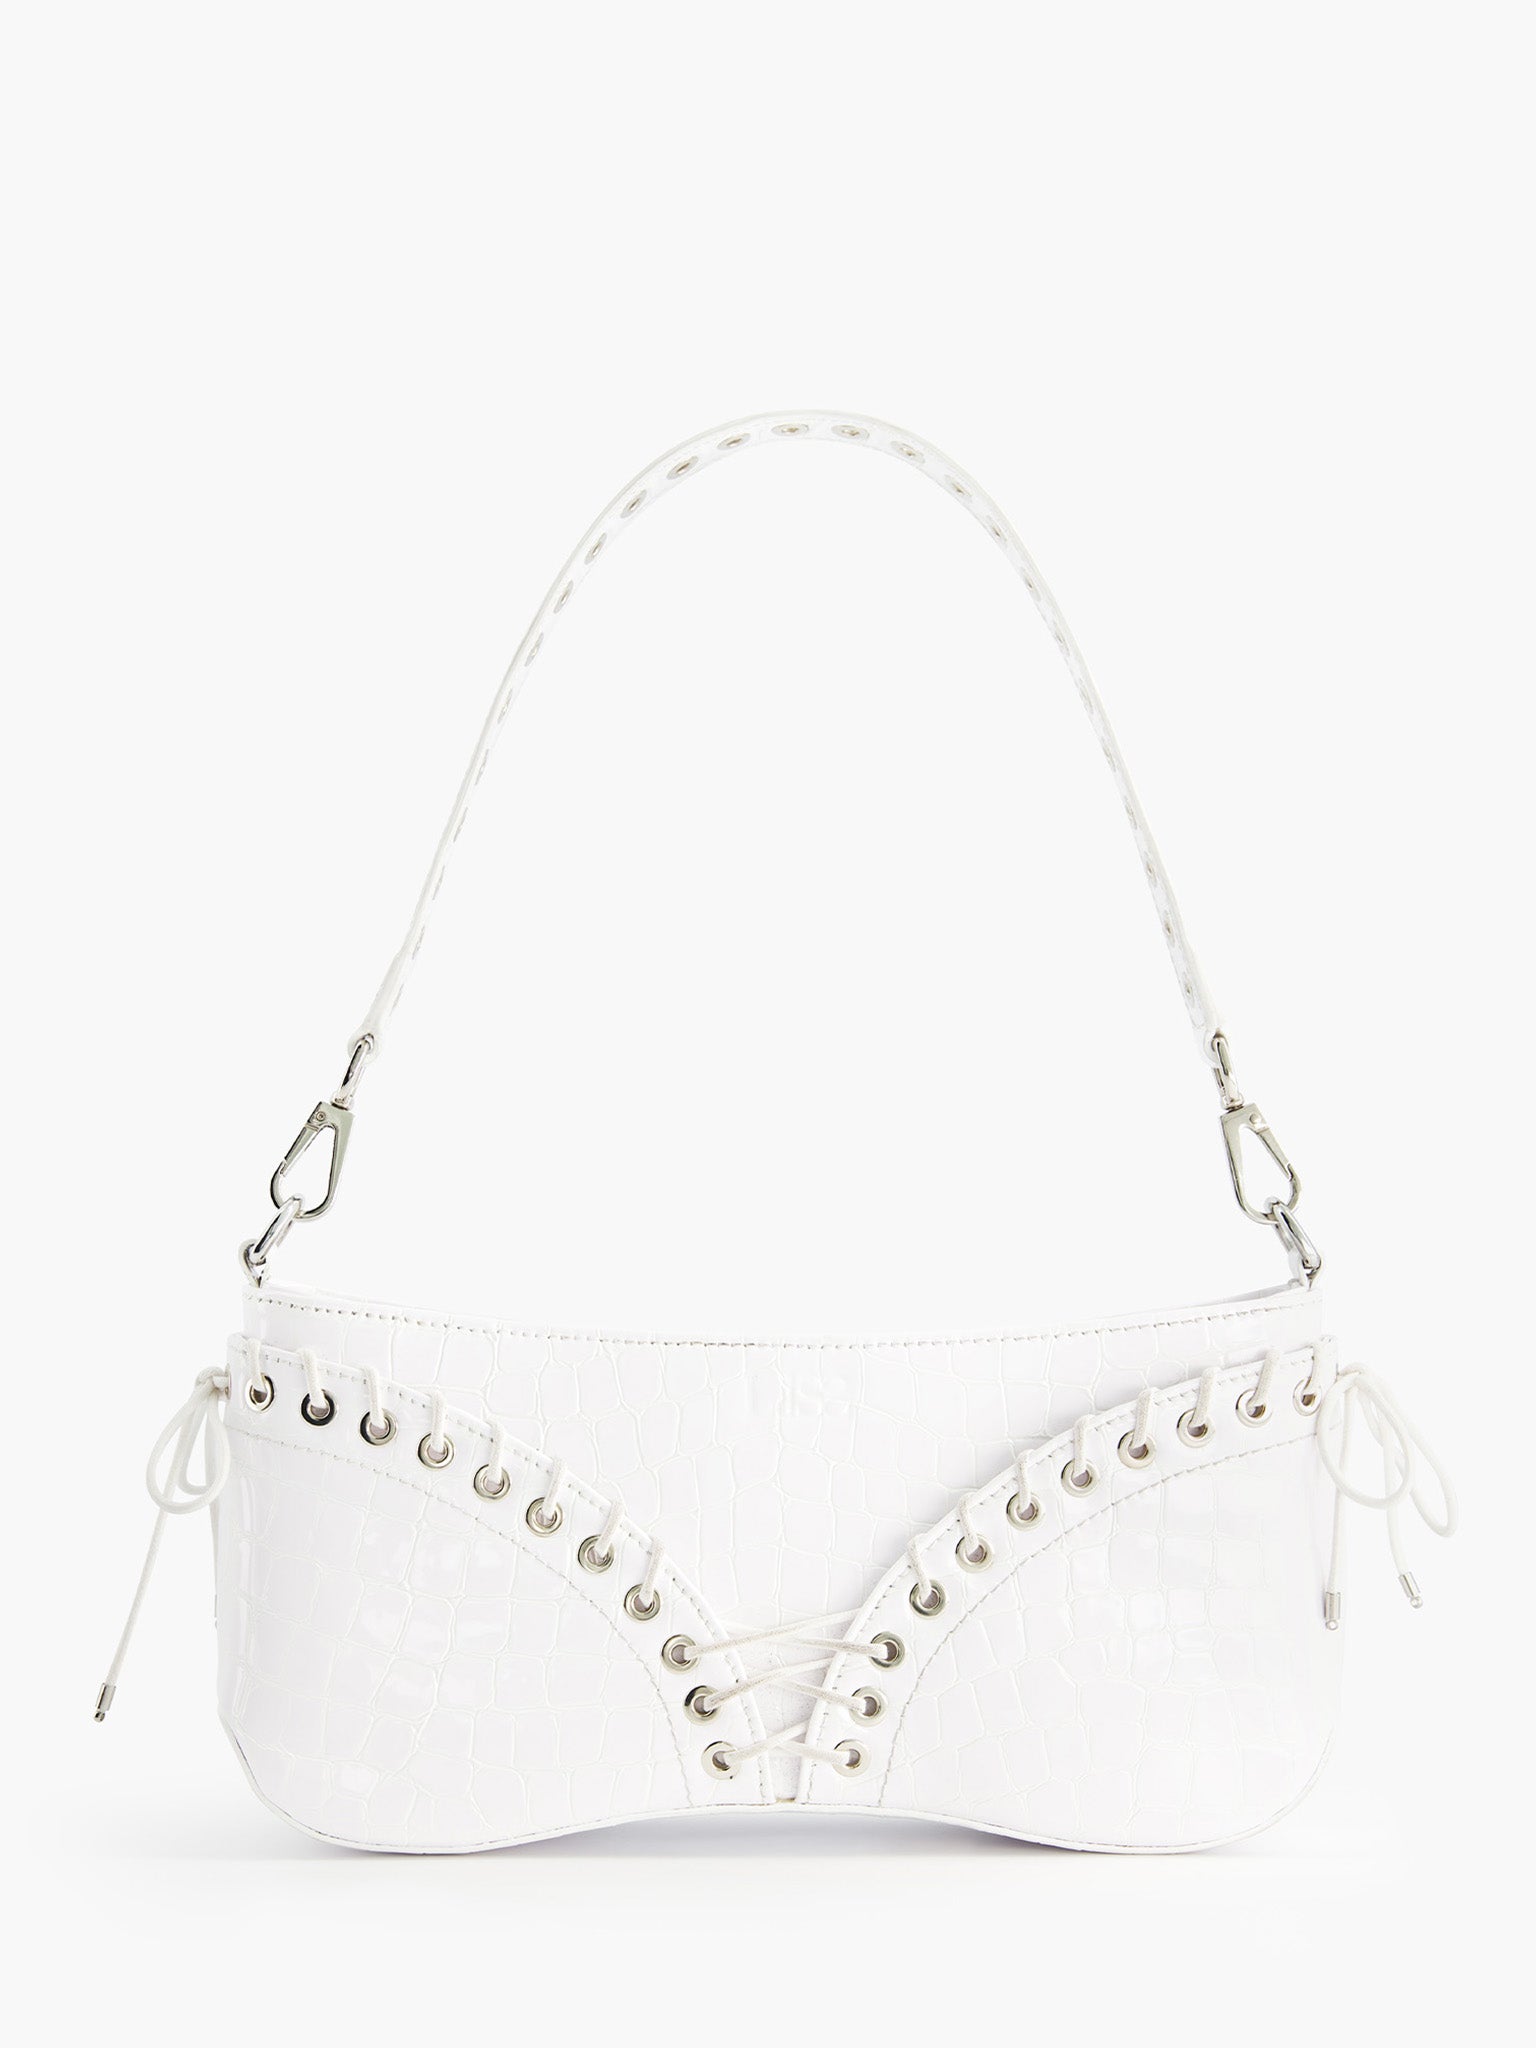 The Cleavage Bag in White Patent Embossed Leather